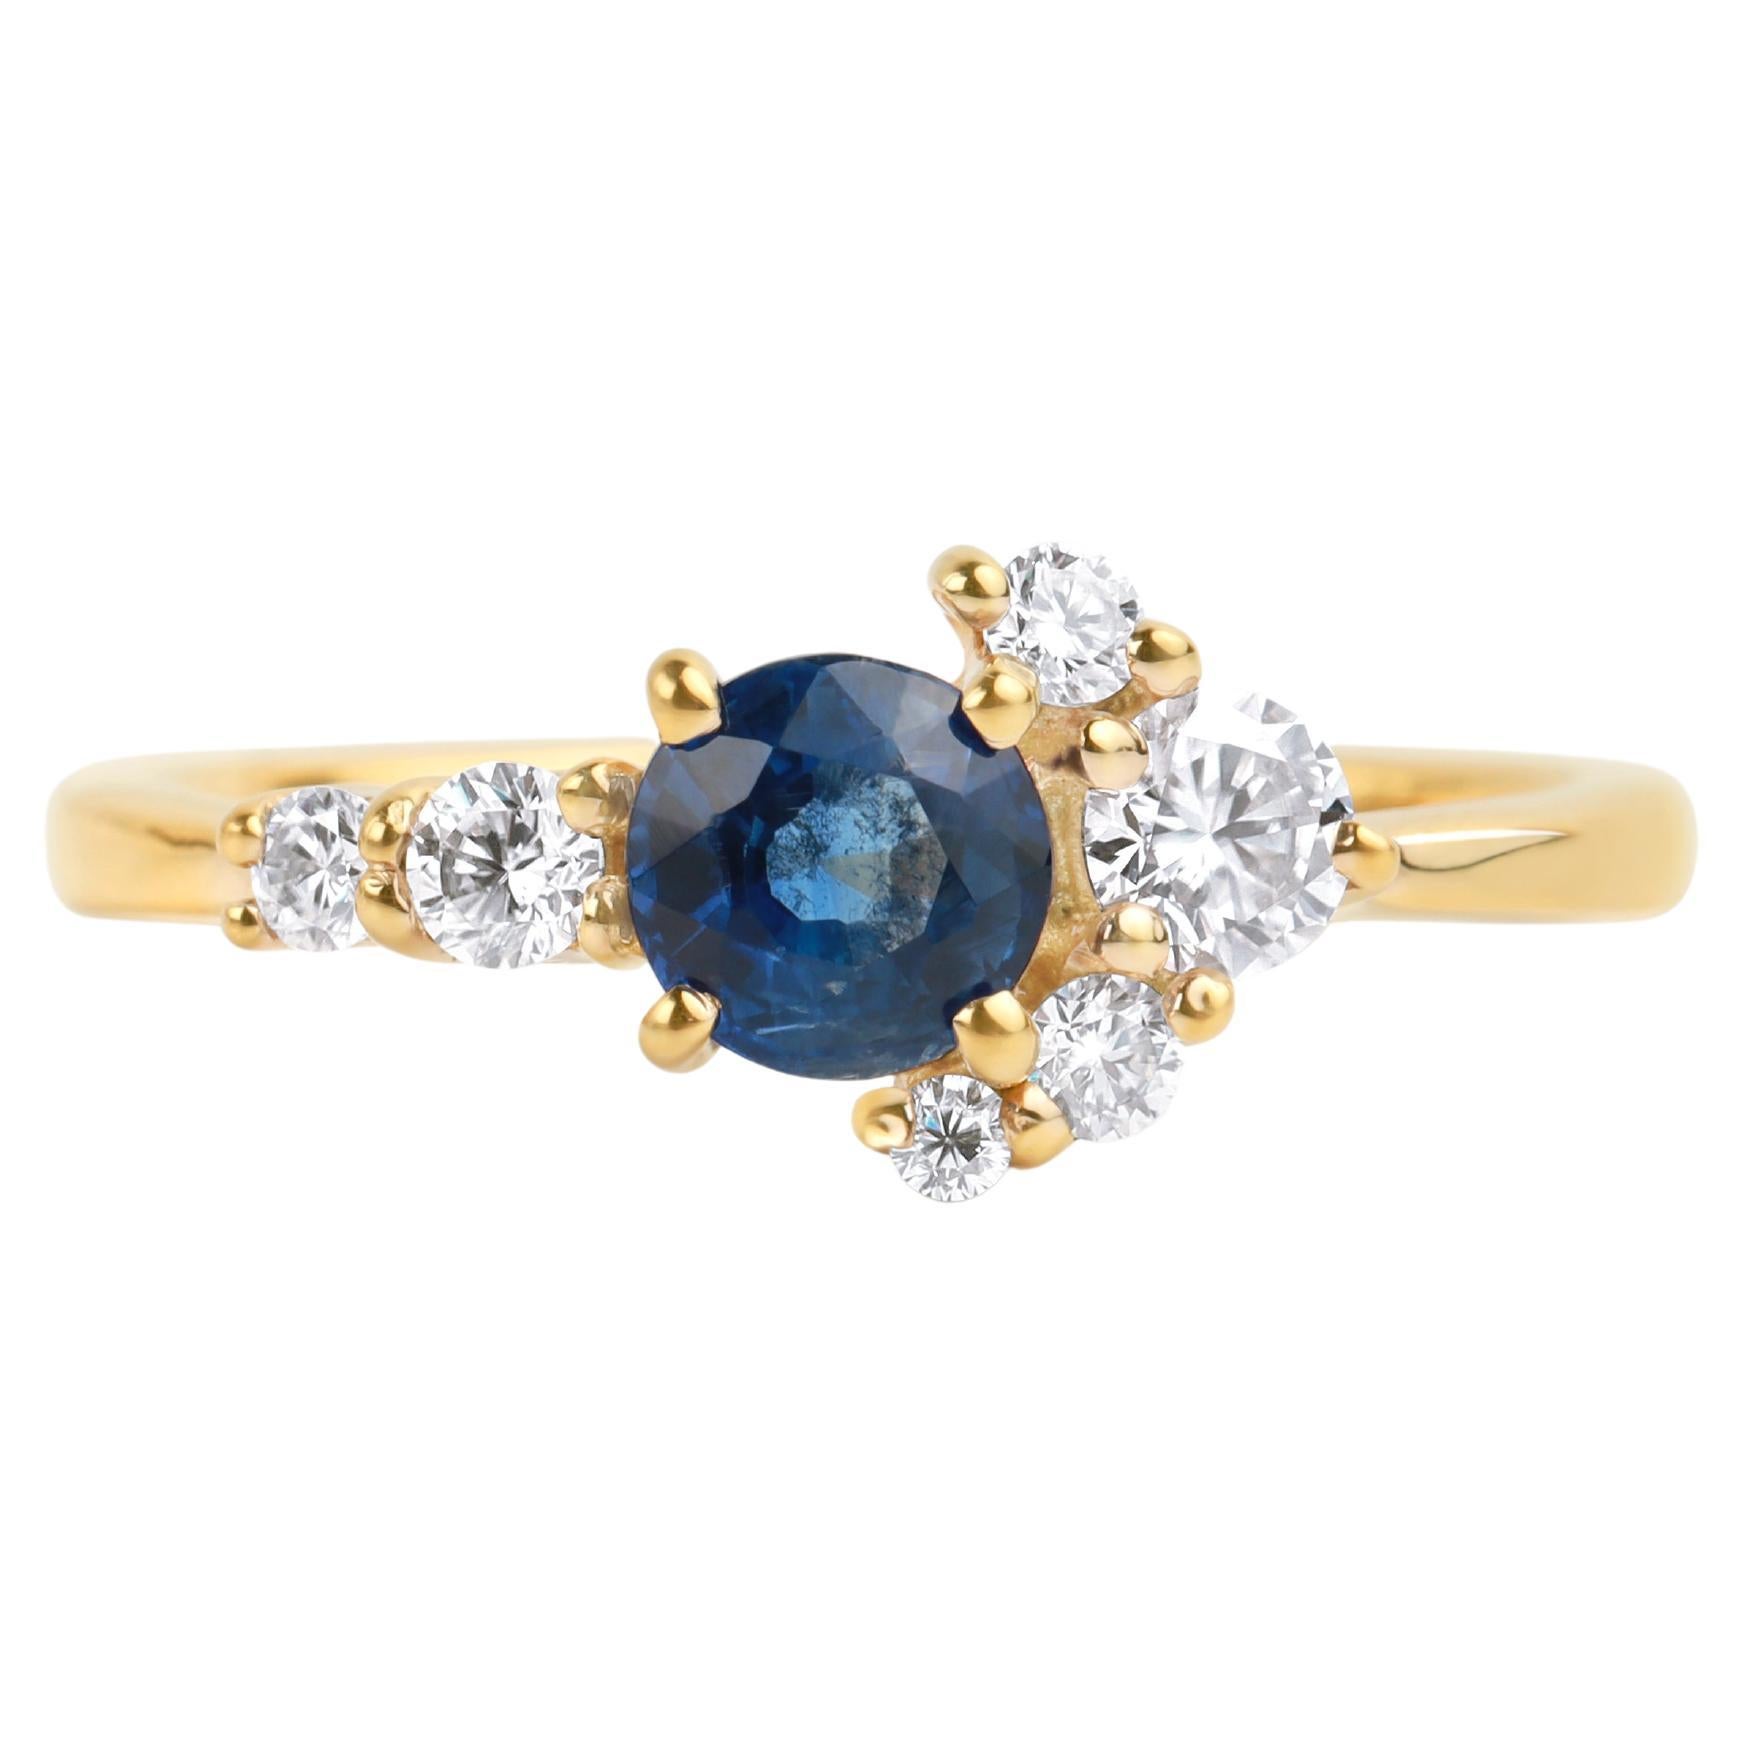 Round Blue Sapphire Diamond Cluster Cocktail Engagement Proposal Ring For Her